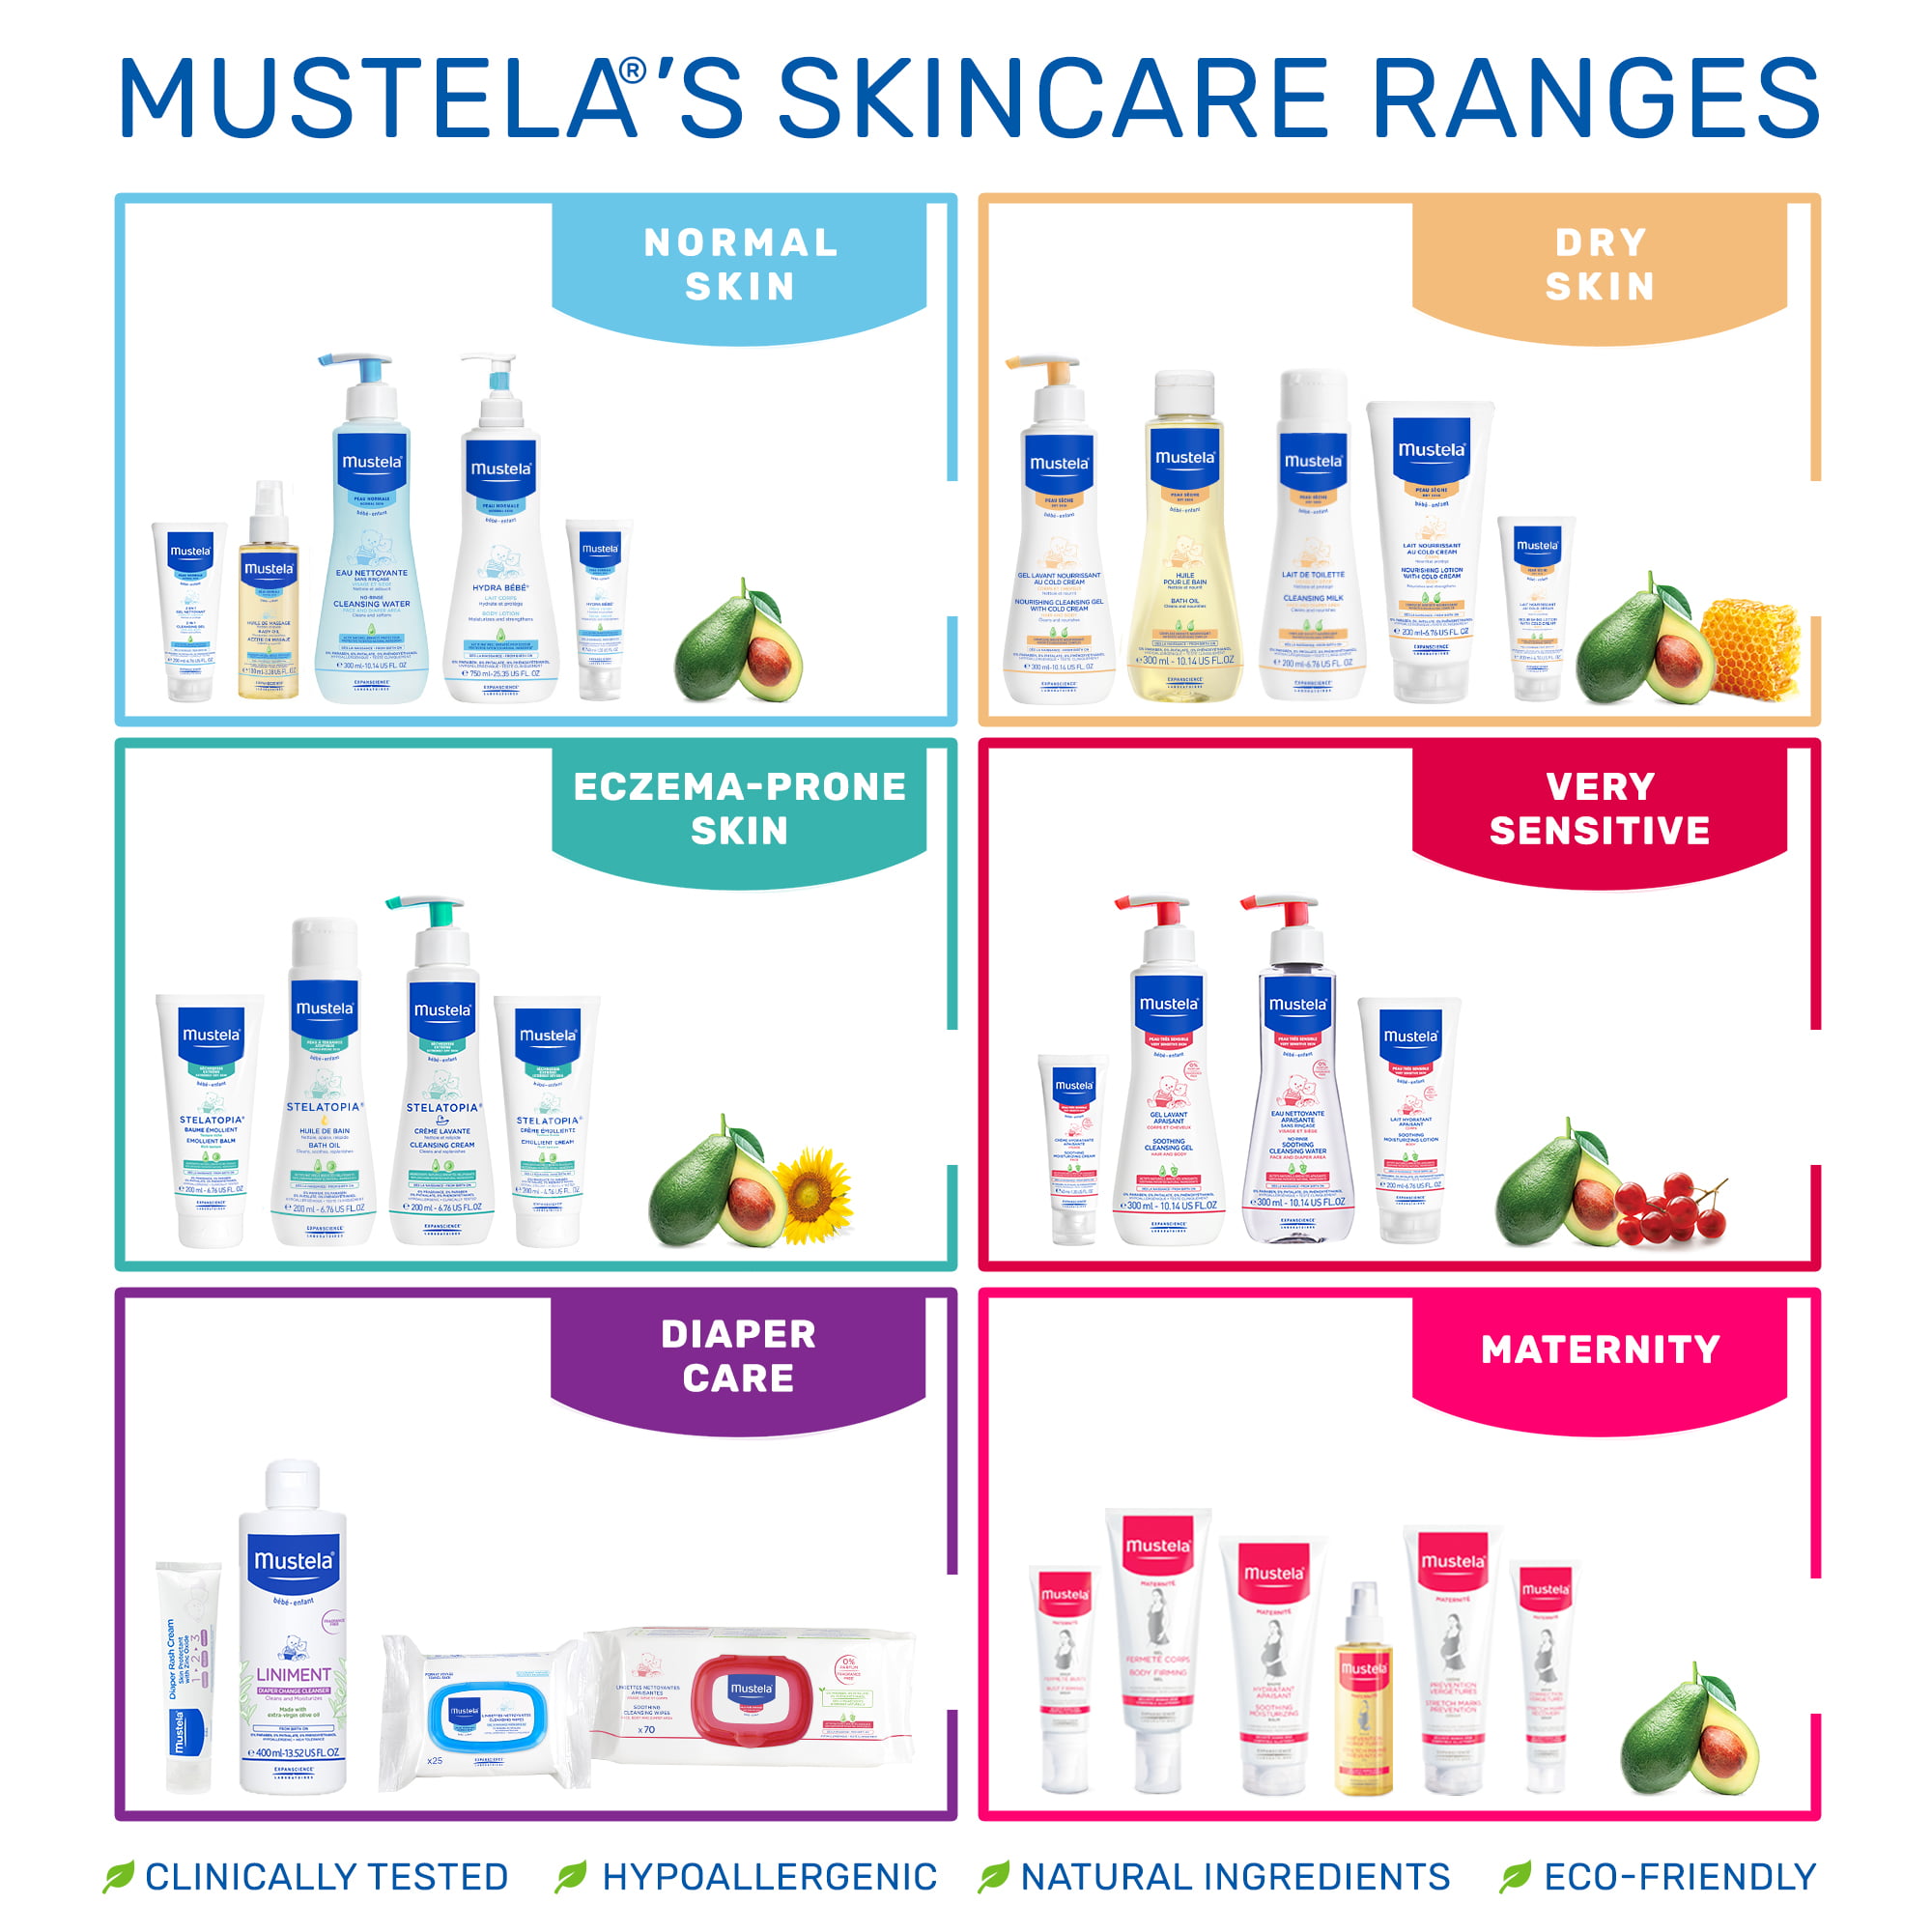  Mustela Baby Gentle Cleansing Gel - Baby Hair & Body Wash -  with Natural Avocado fortified with Vitamin B5 - Biodegradable Formula &  Tear-Free â€“ 16.90 fl. oz. (Pack of 1) : Baby